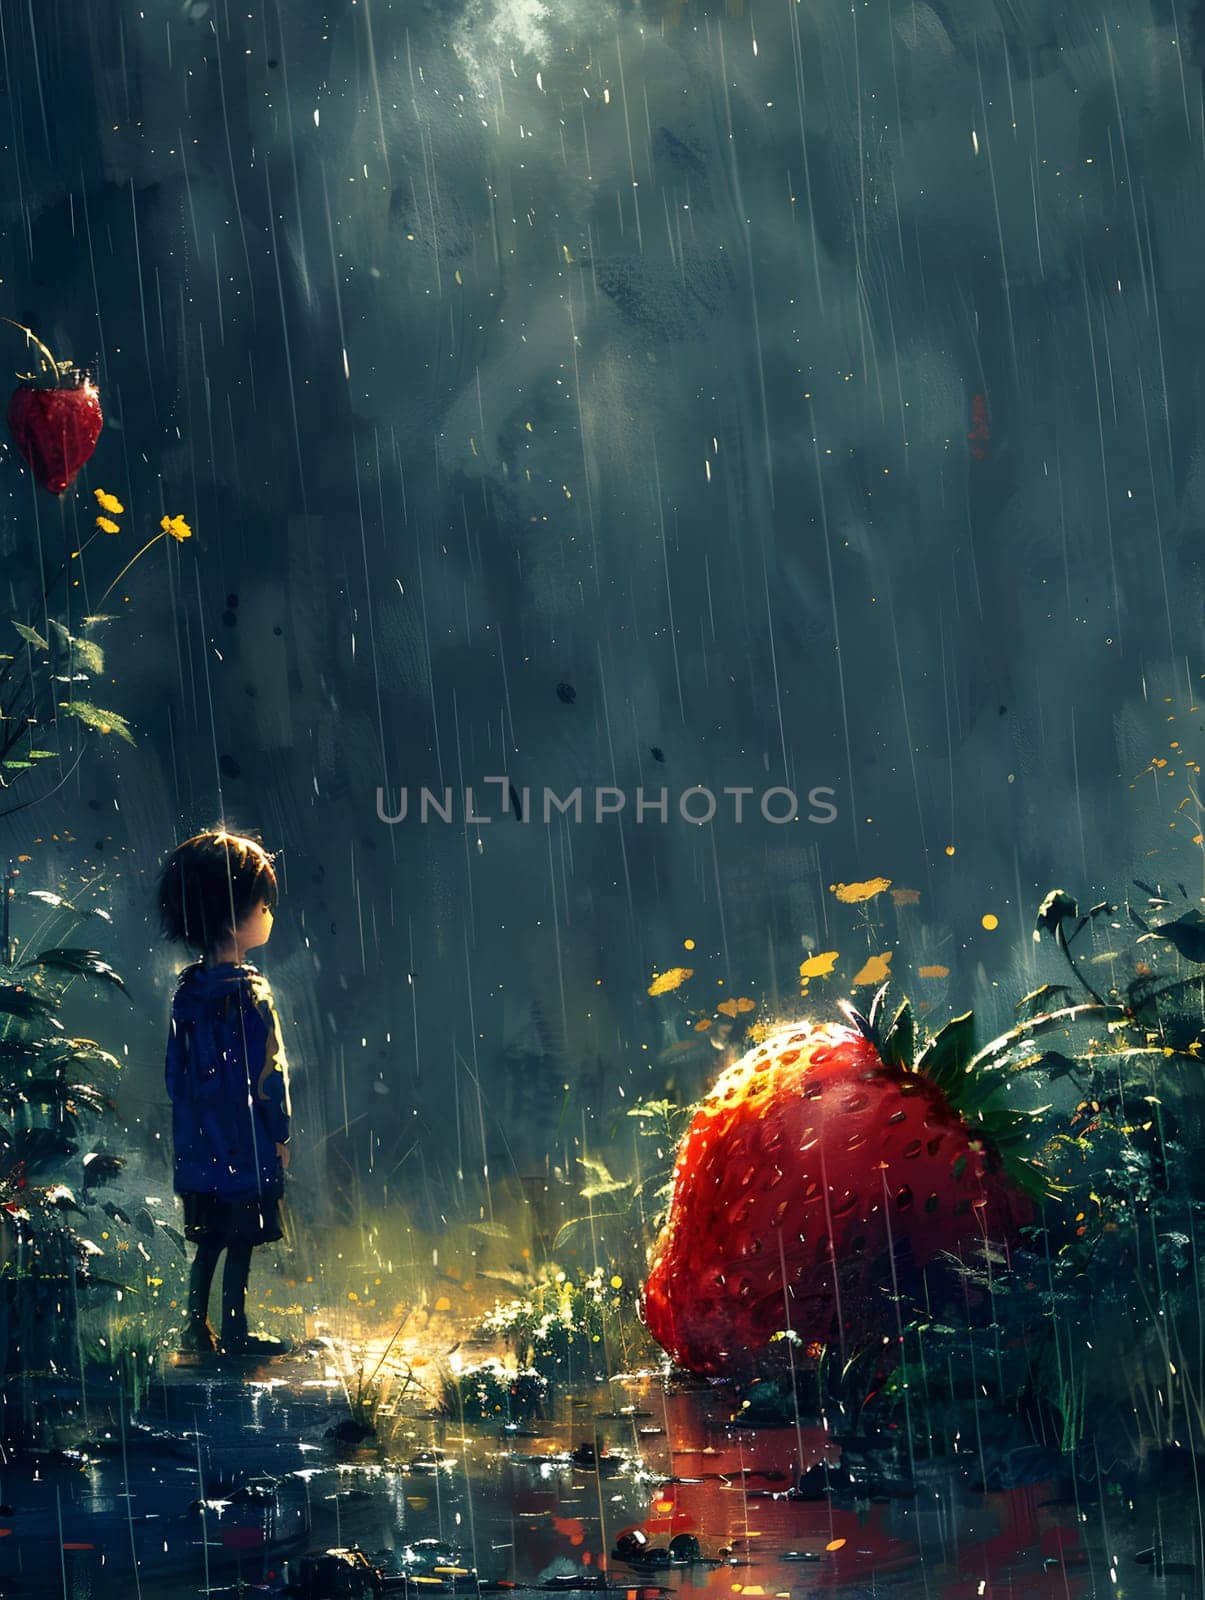 A young child stands in the rain beside a massive strawberry, blending art and nature in a whimsical scene in the natural landscape